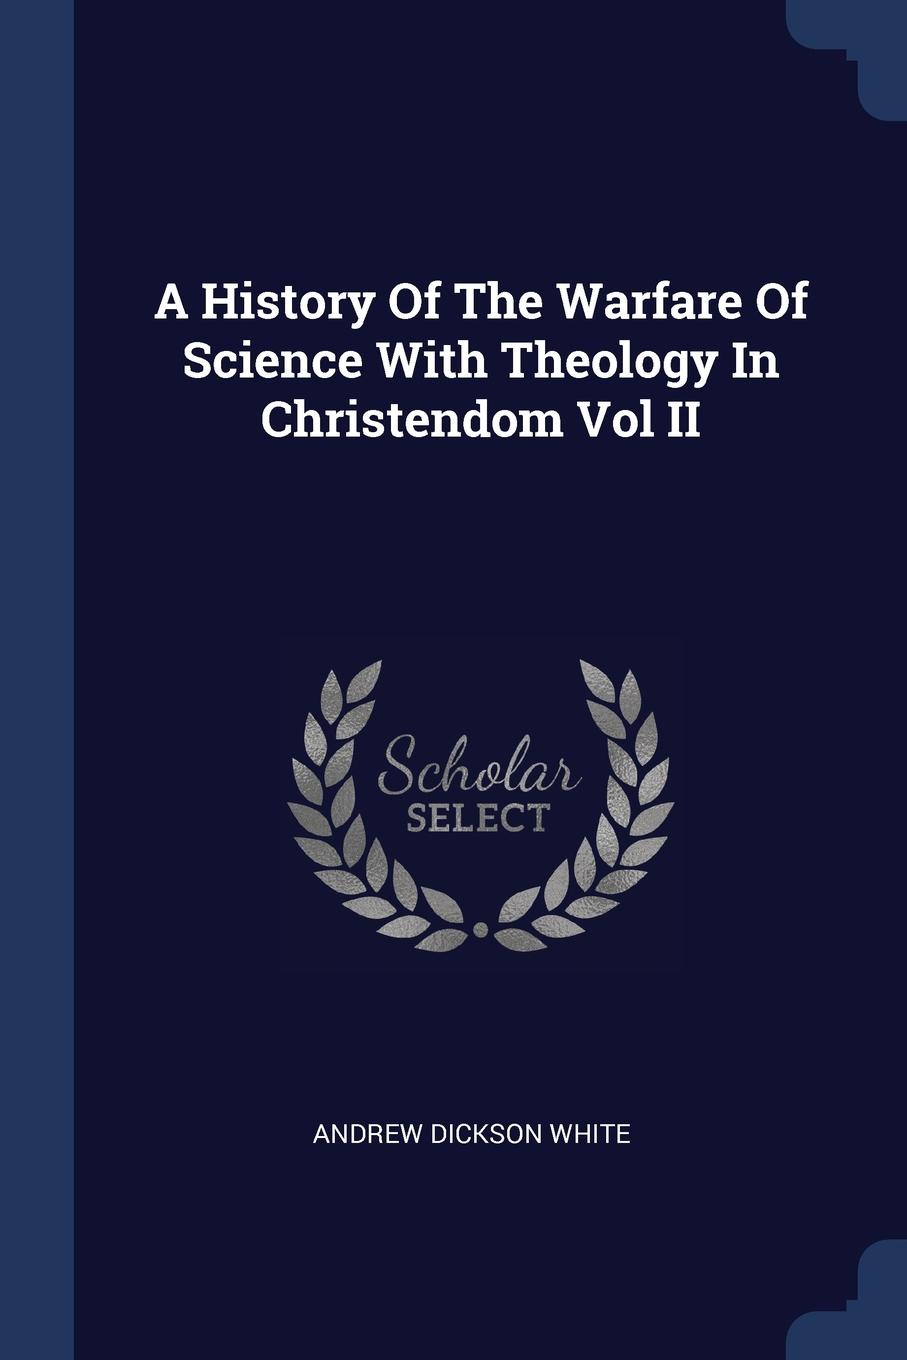 A History Of The Warfare Of Science With Theology In Christendom Vol II